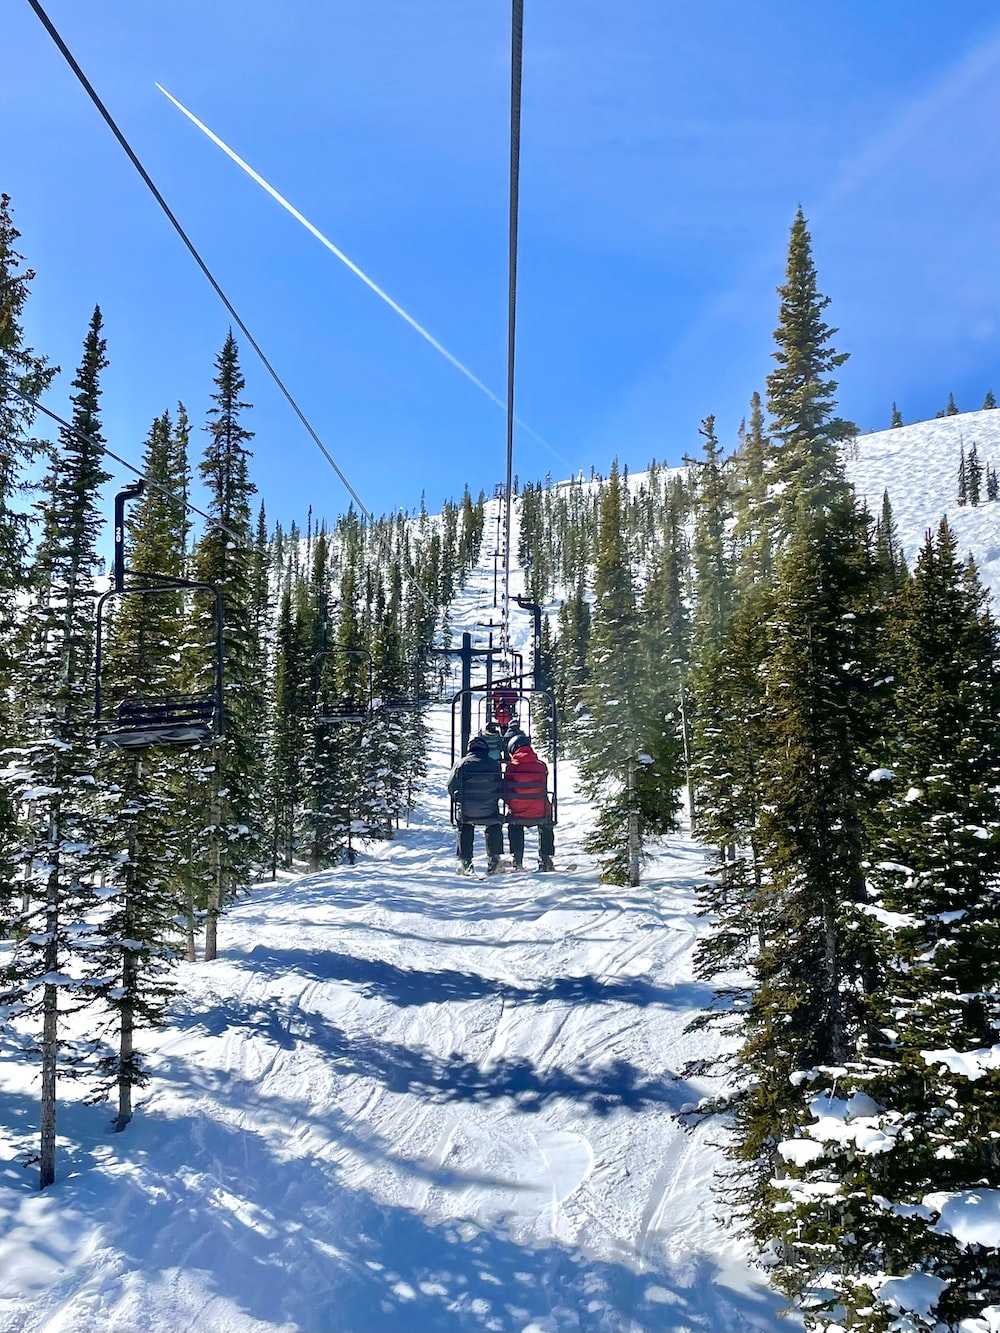 two people riding a ski lift in the snow